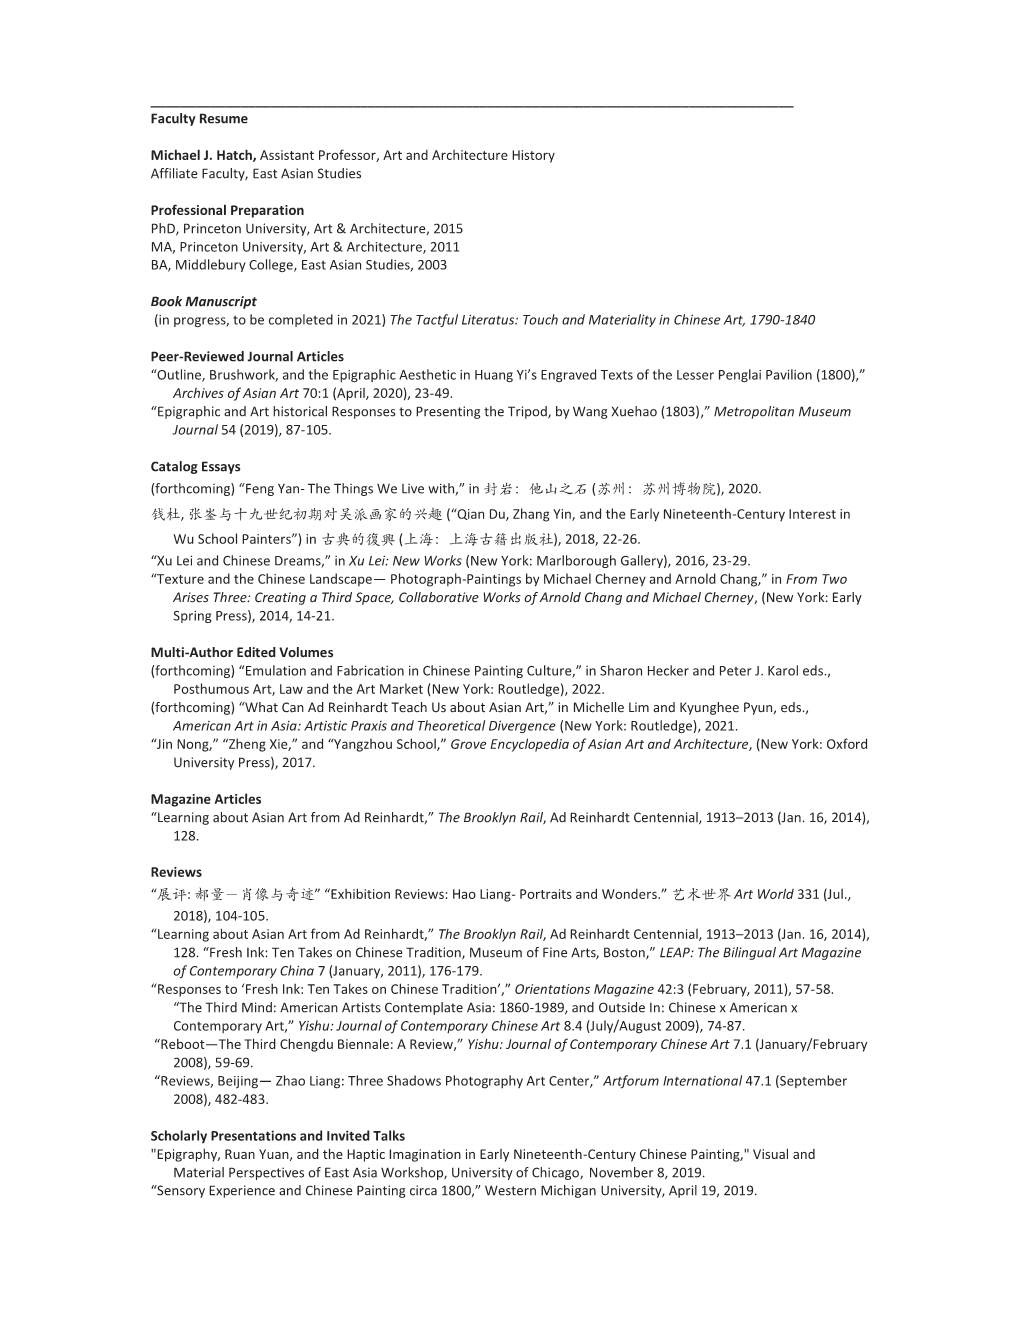 Two-Page Resume